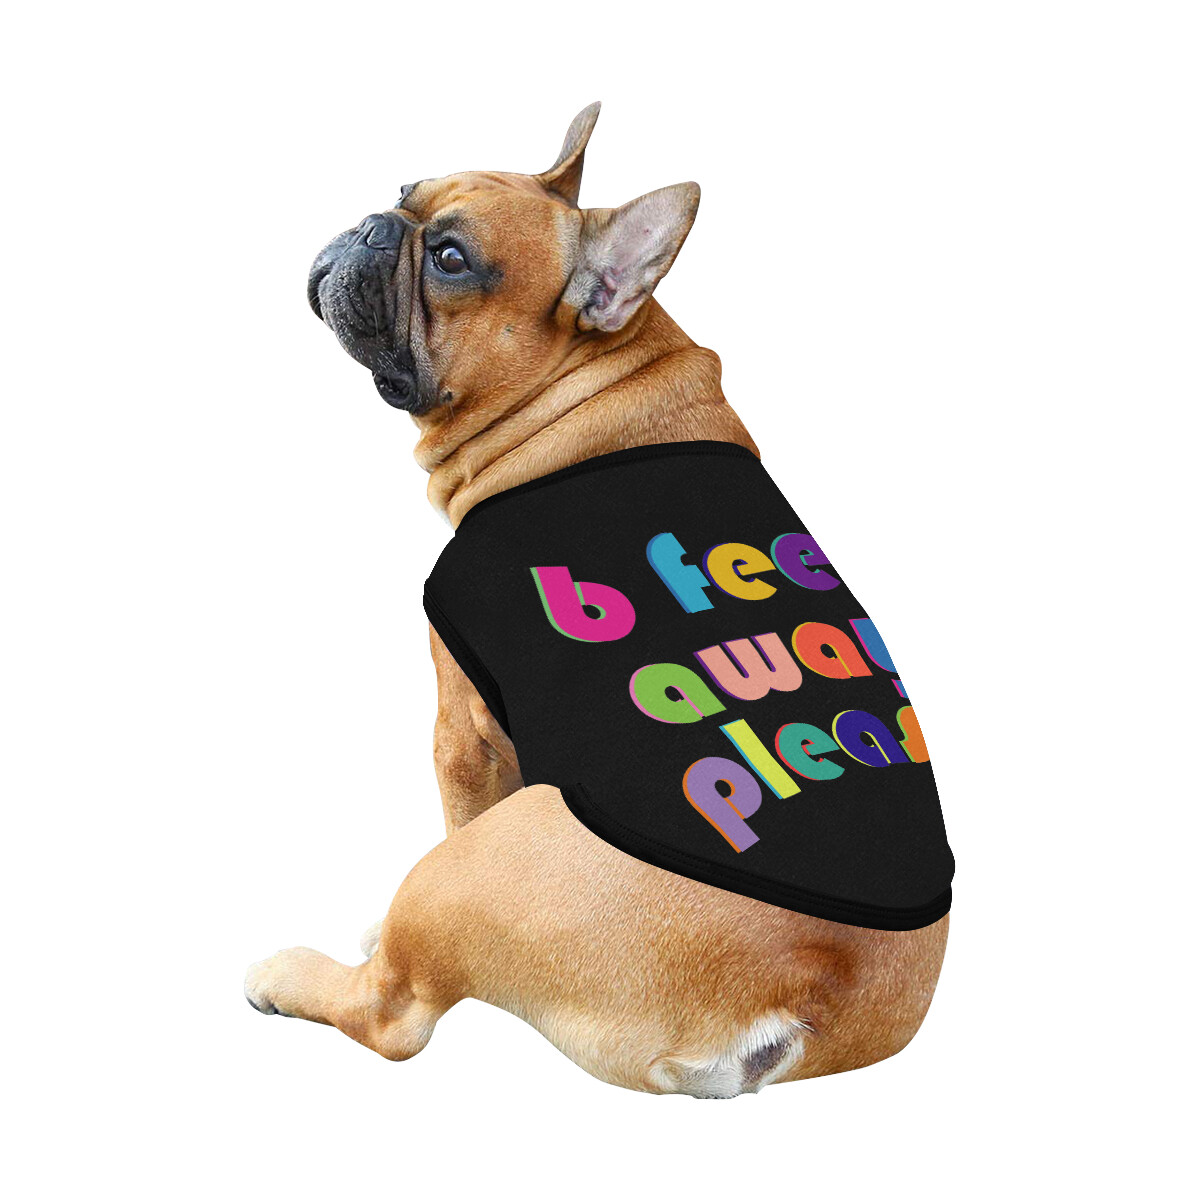 🐕 6 feet away please Dog shirt, Dog Tank Top, Dog t-shirt, Dog clothes, Gifts, front back print, 7 sizes XS to 3XL, dog gifts, black